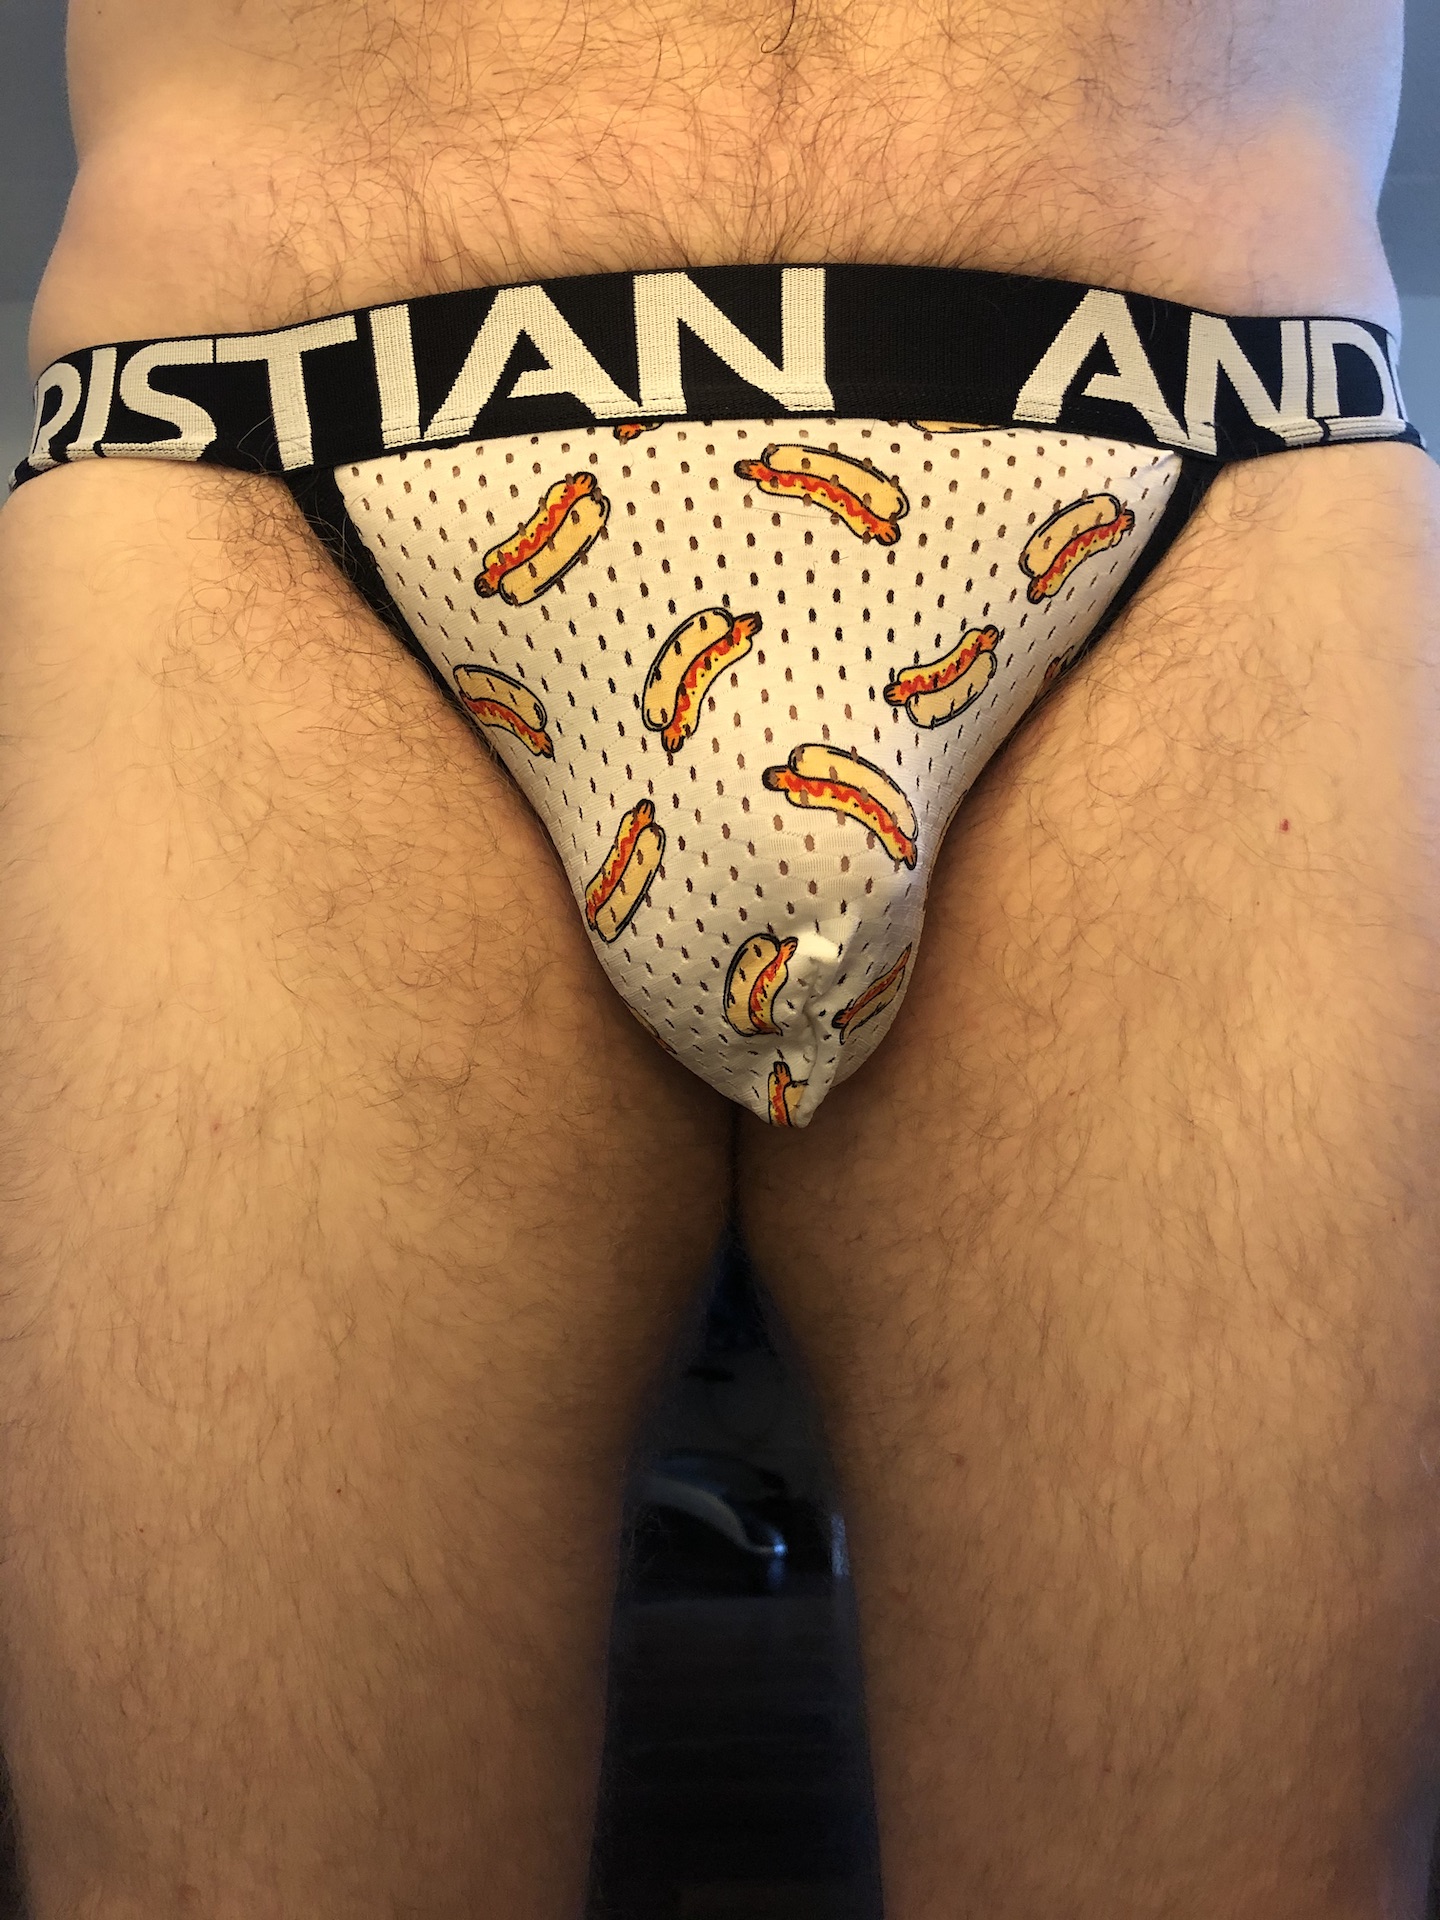 Wieners and long-johns and briefs…oh my!